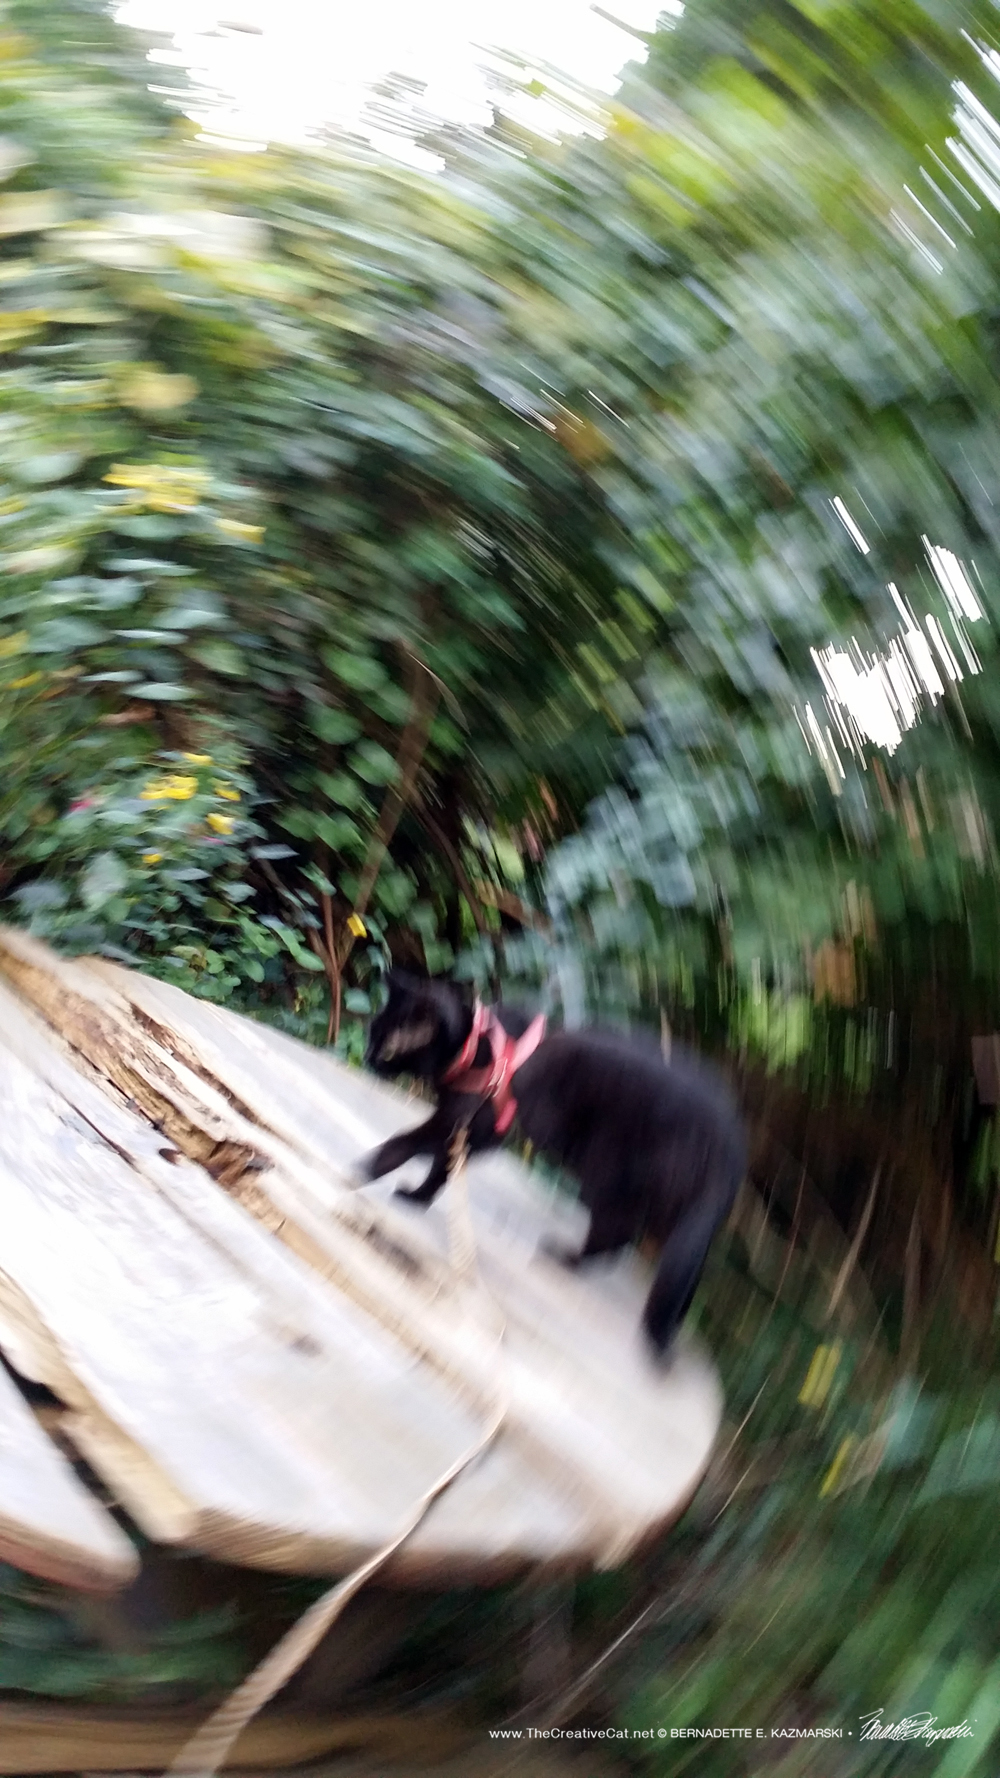 Just one of those weird spinning photos. Maybe it's Mimi.